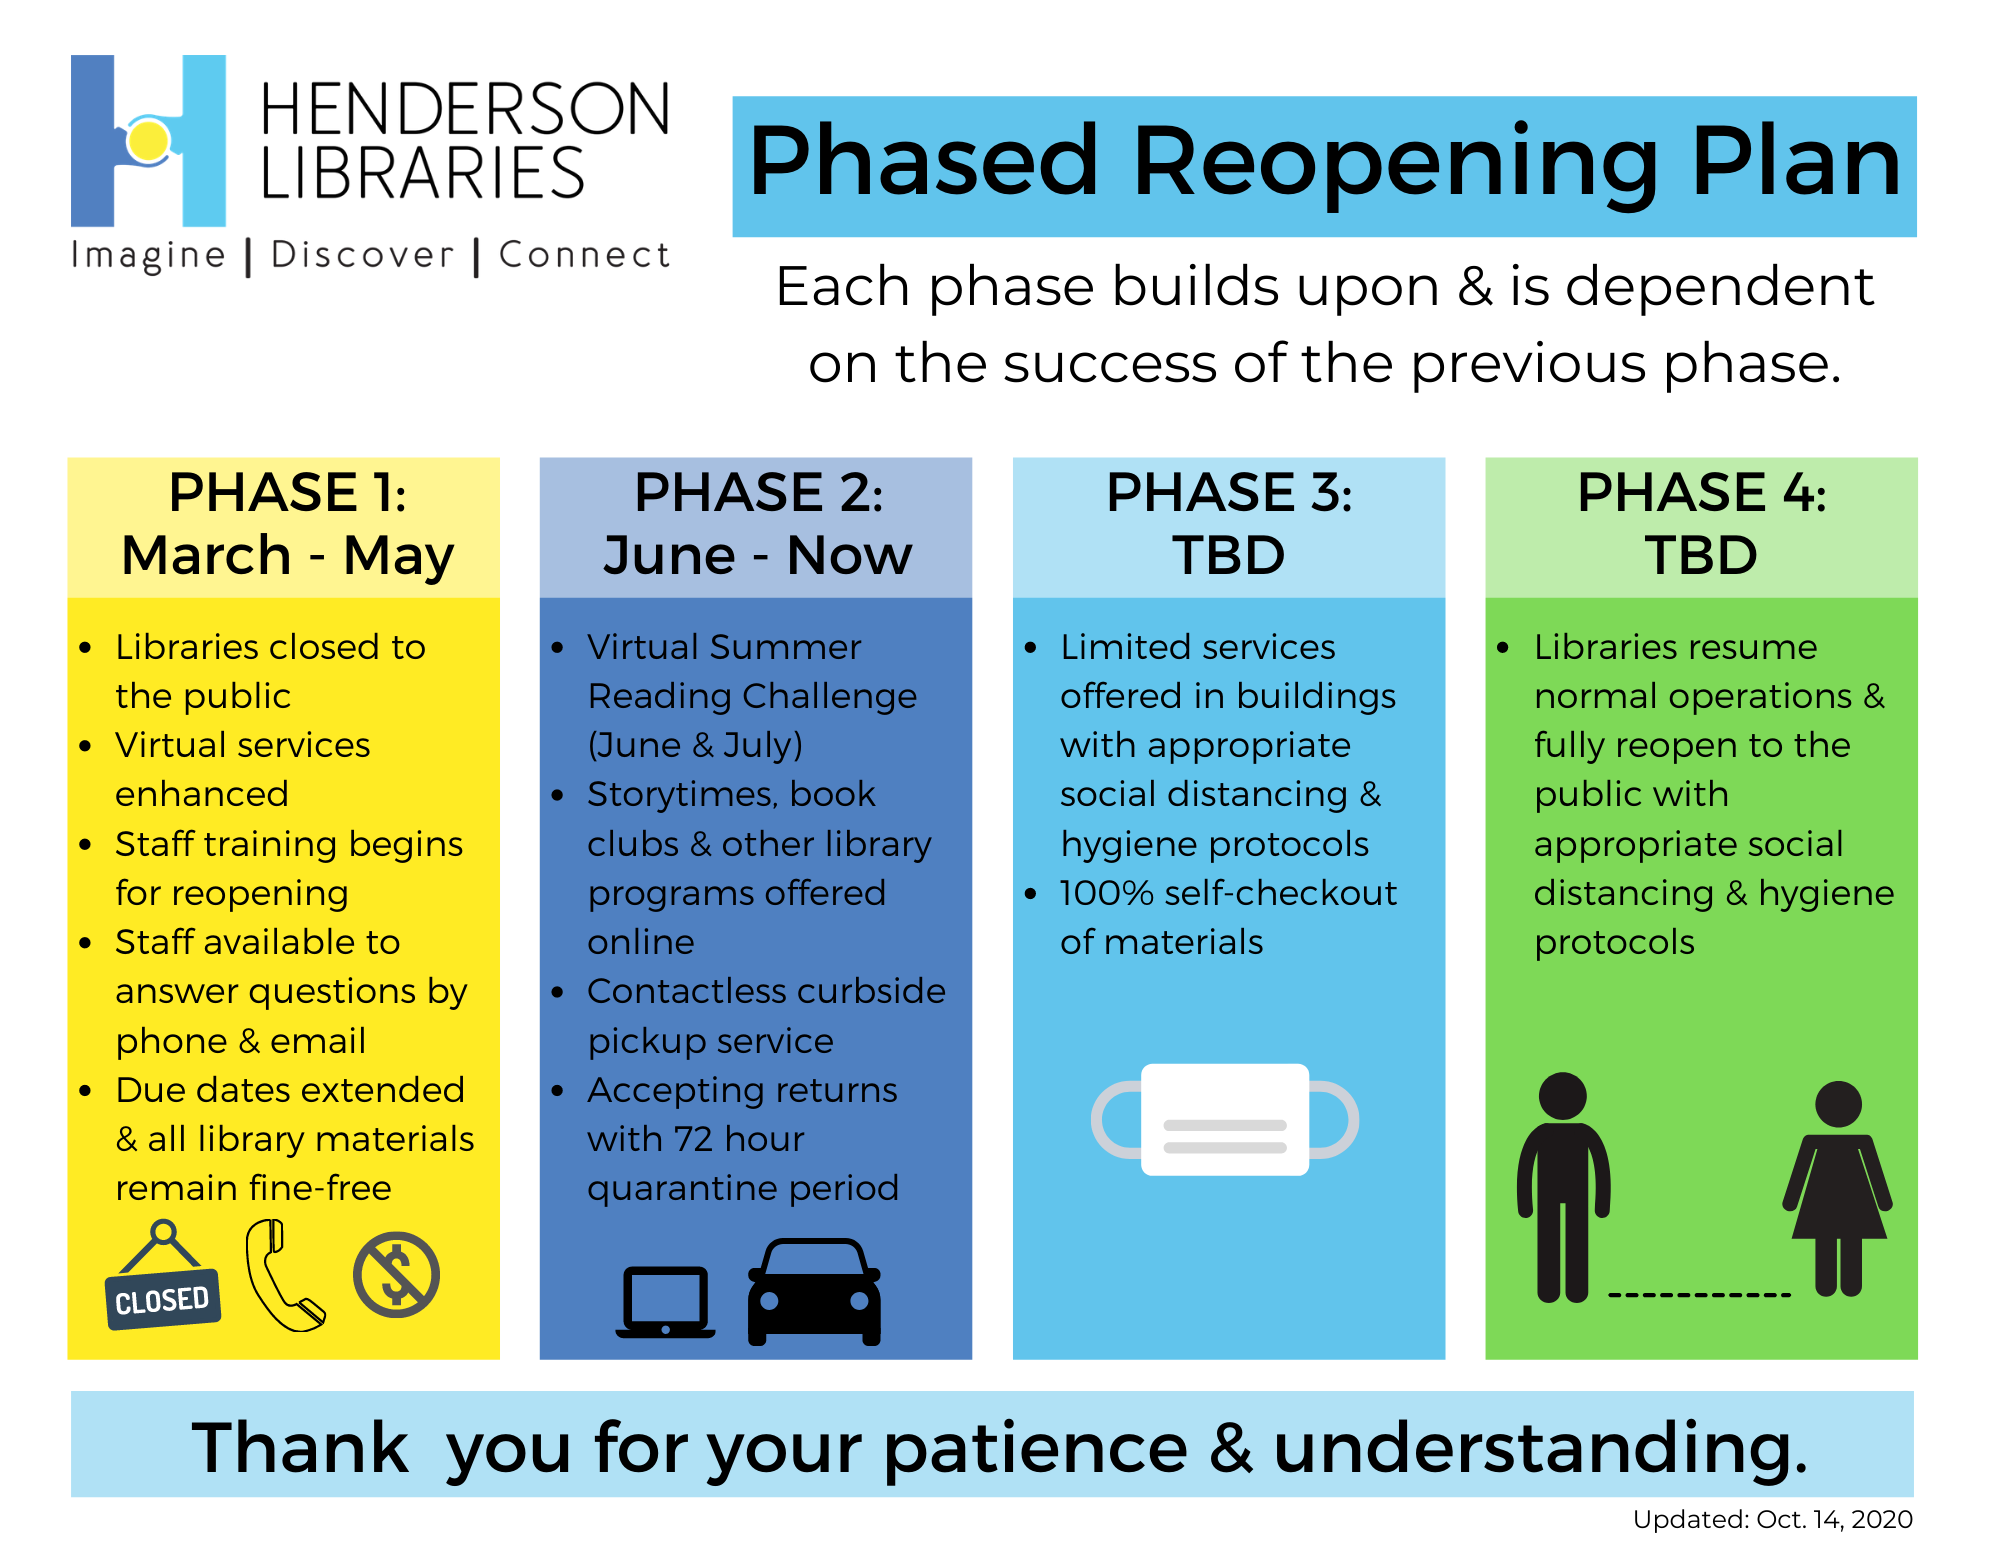 Phased Reopening Plan, Oct 2020